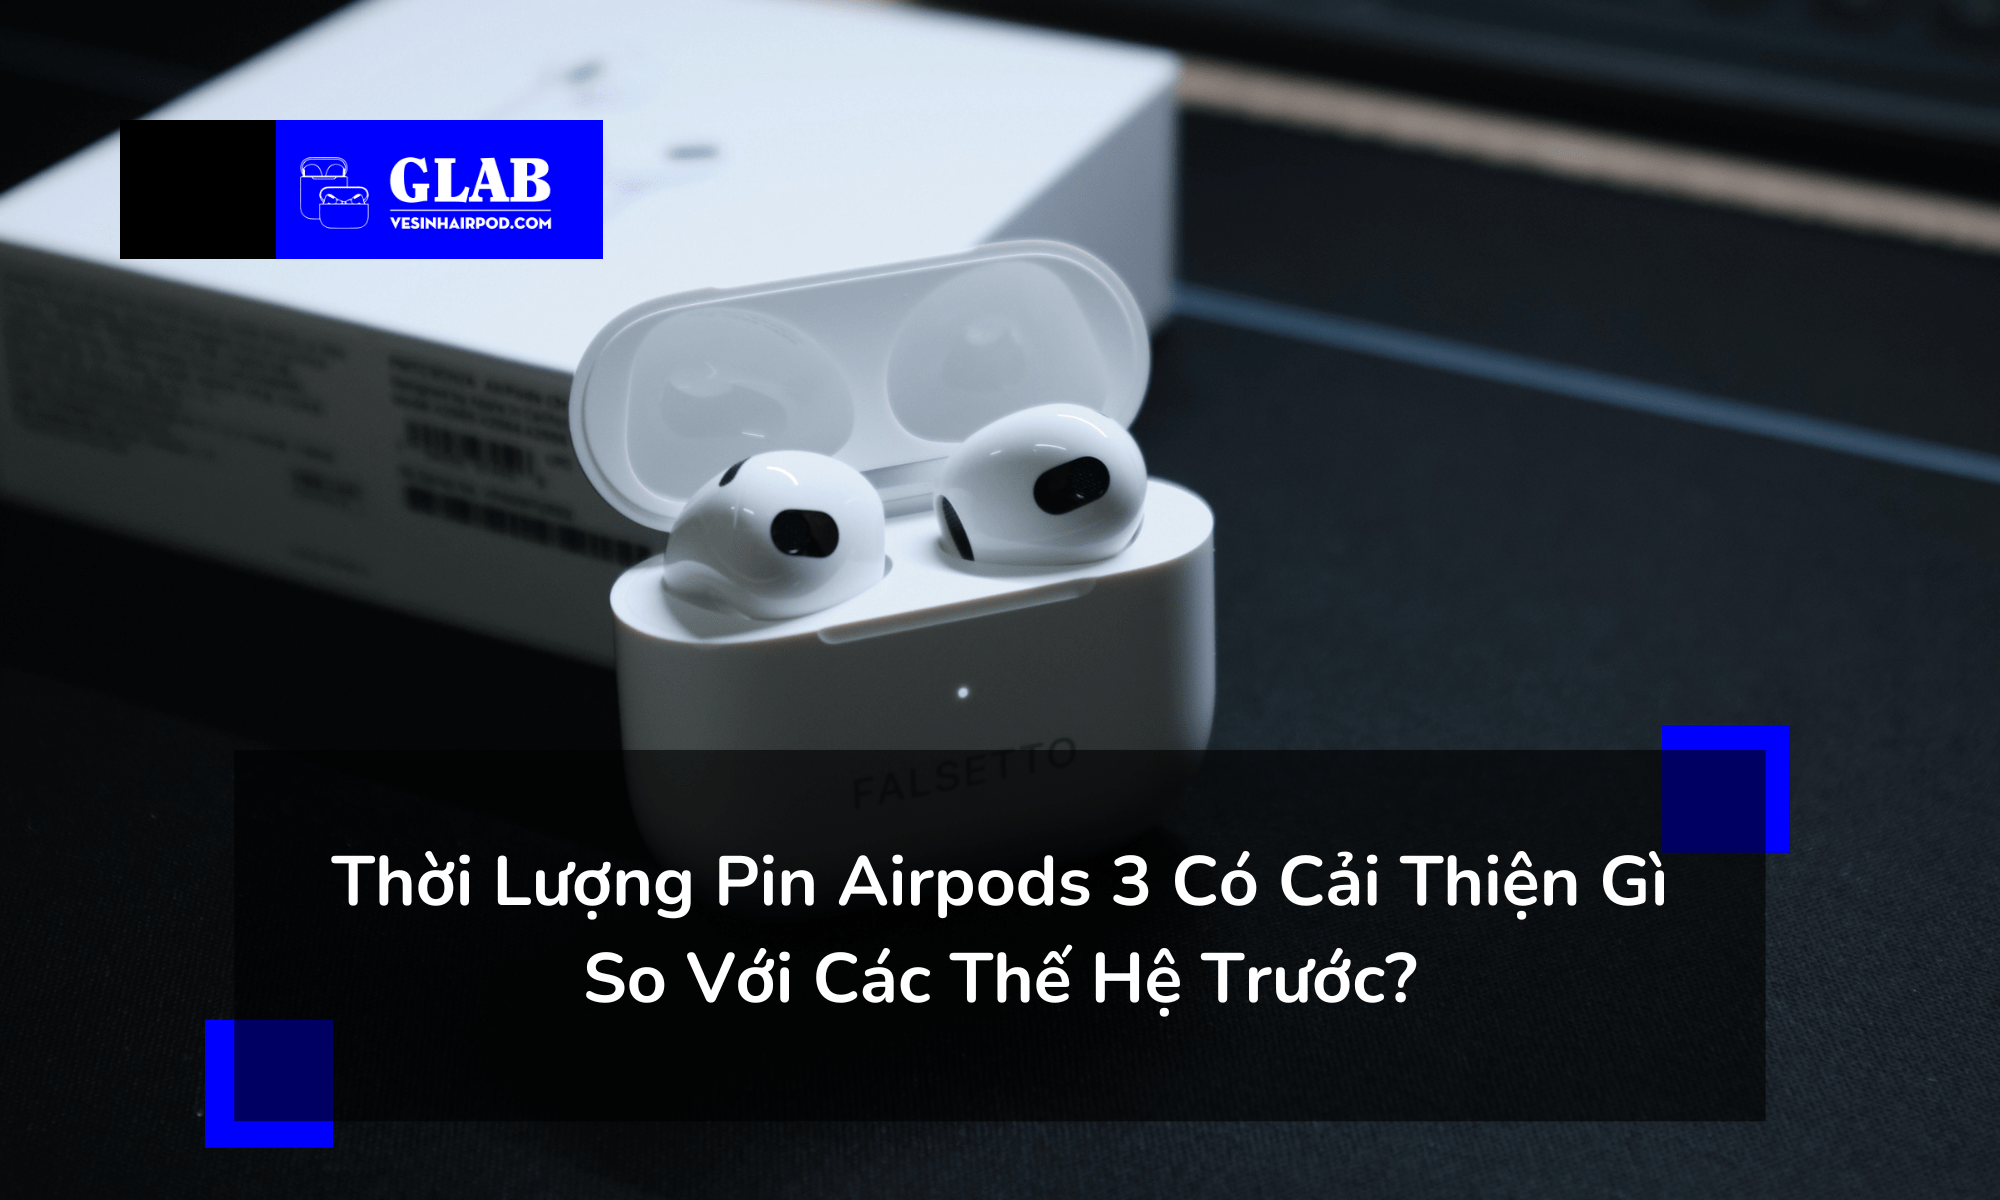 thoi-luong-pin-airpods-3